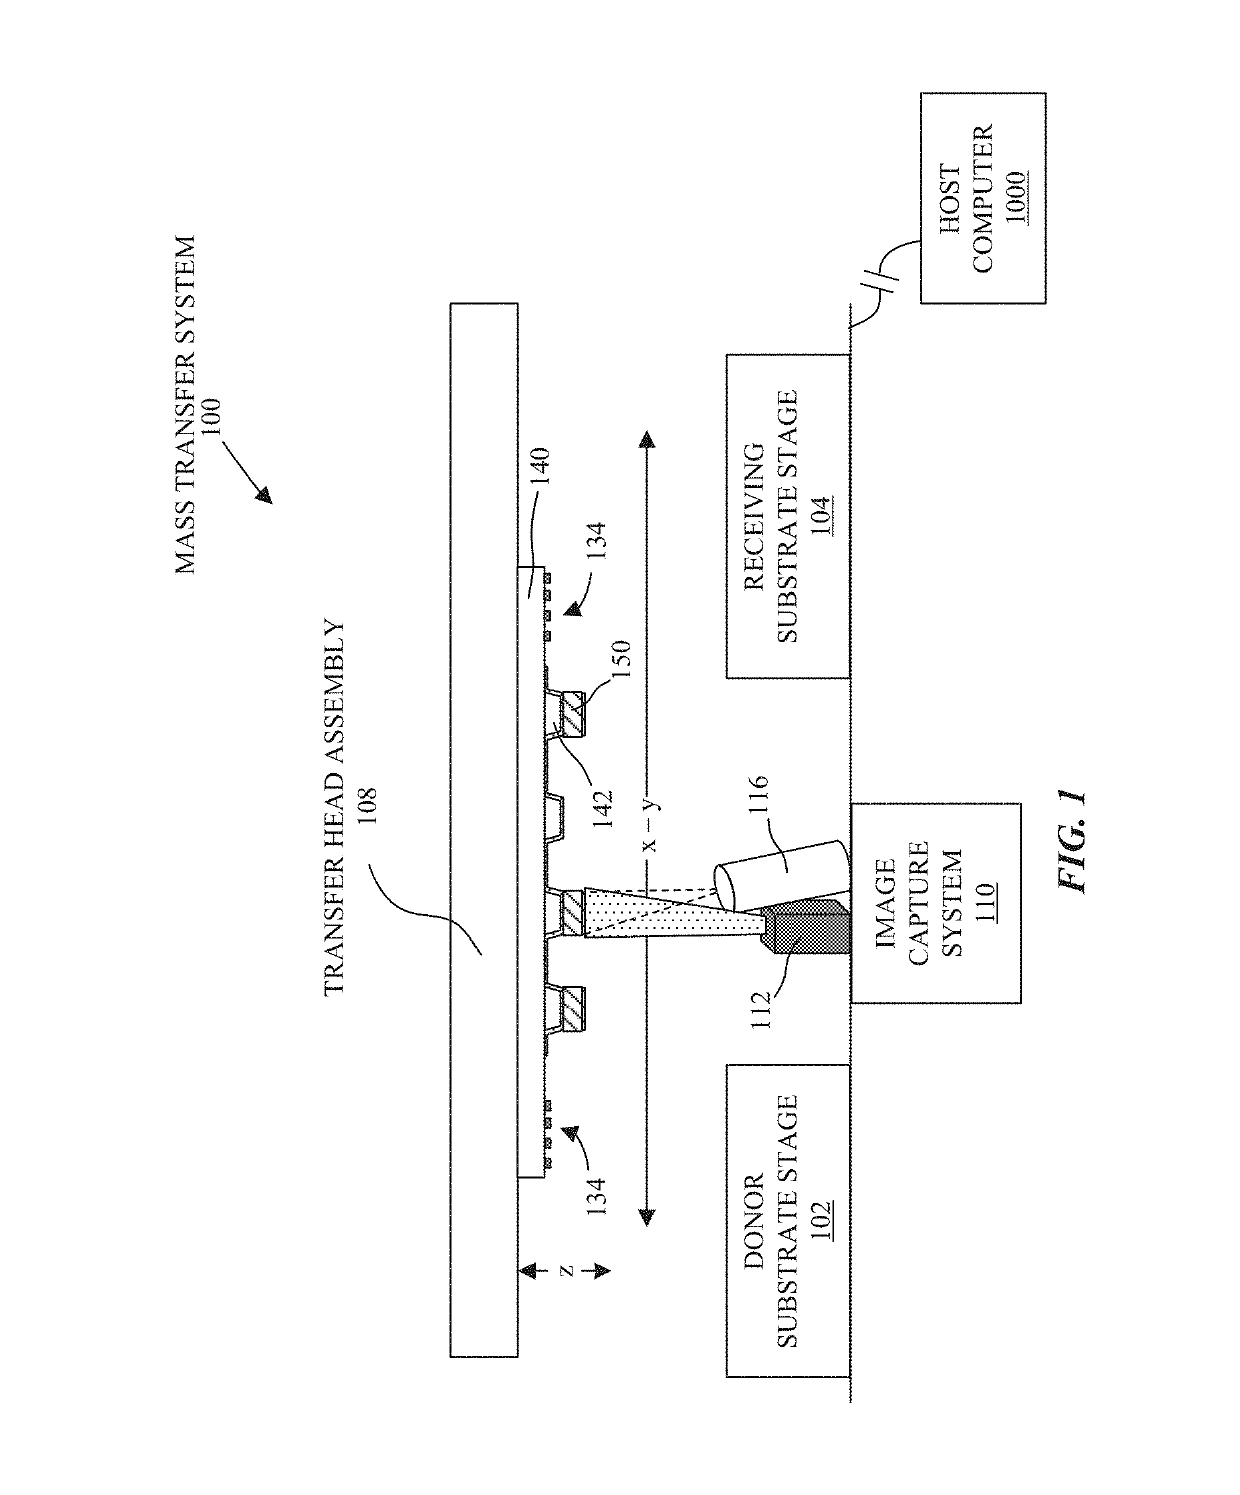 Optical verification system and methods of verifying micro device transfer